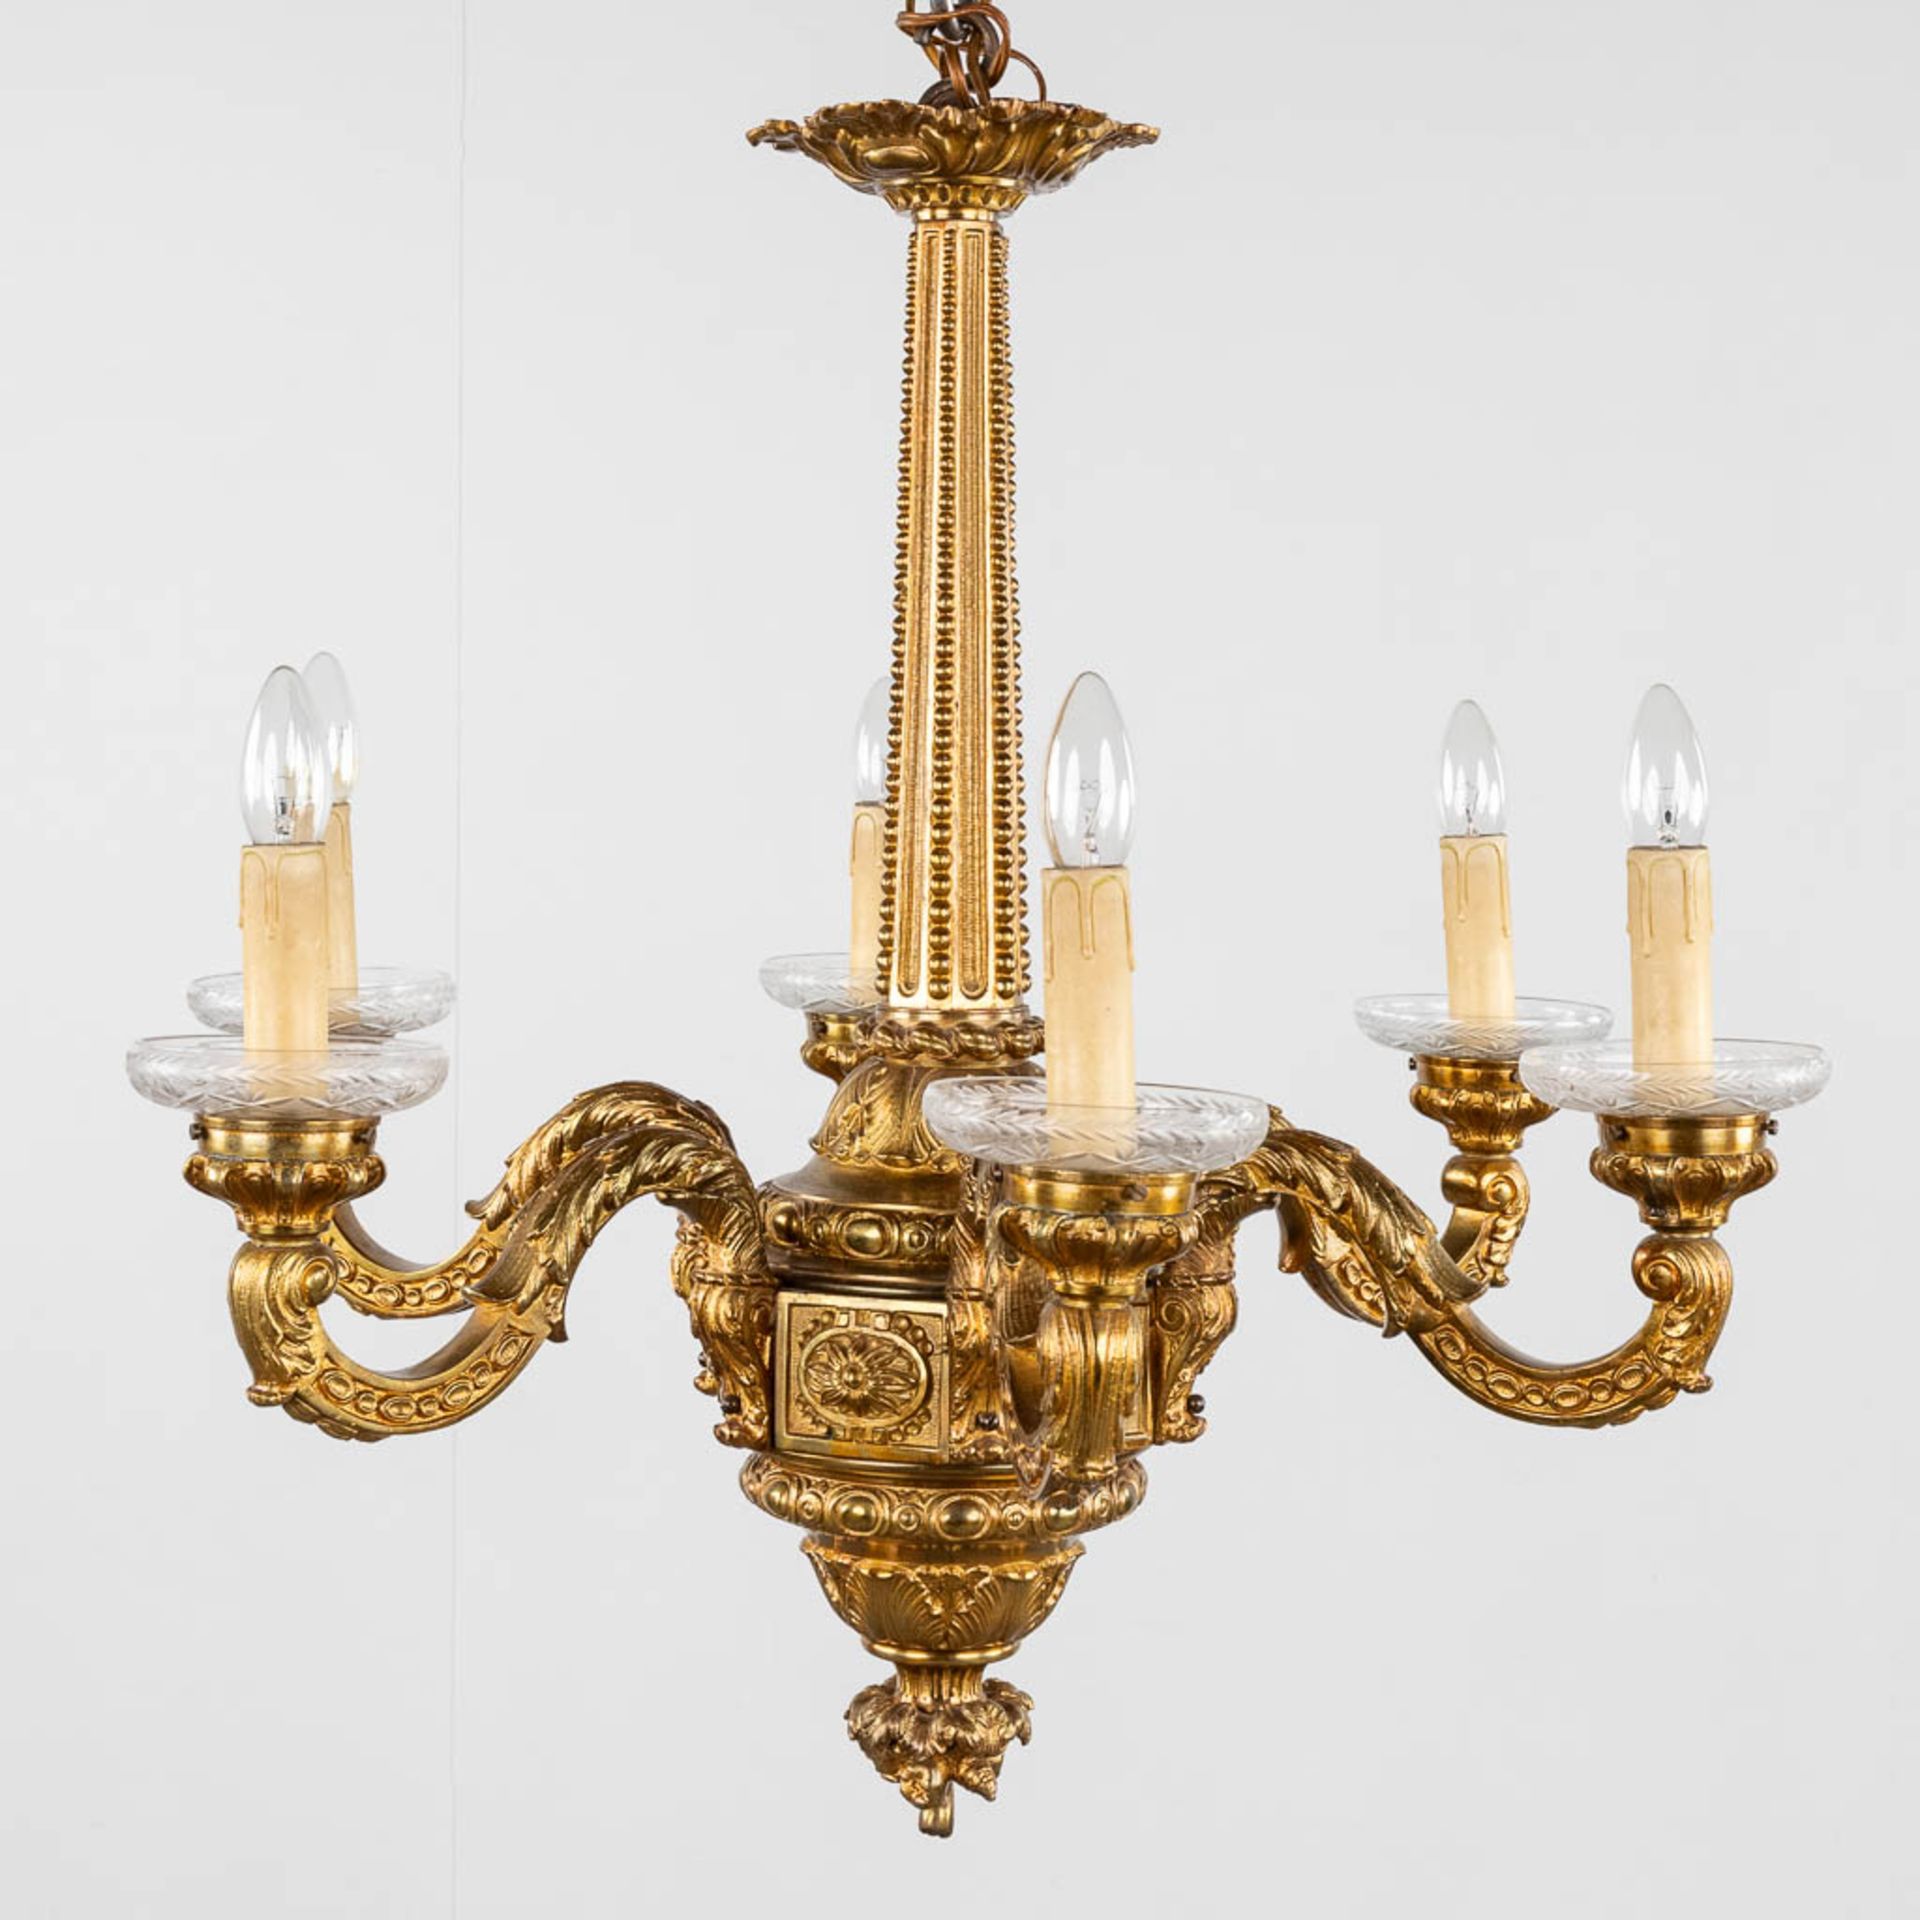 A large chandelier made of gilt bronze, 20th C. (H:72 x D:70 cm)